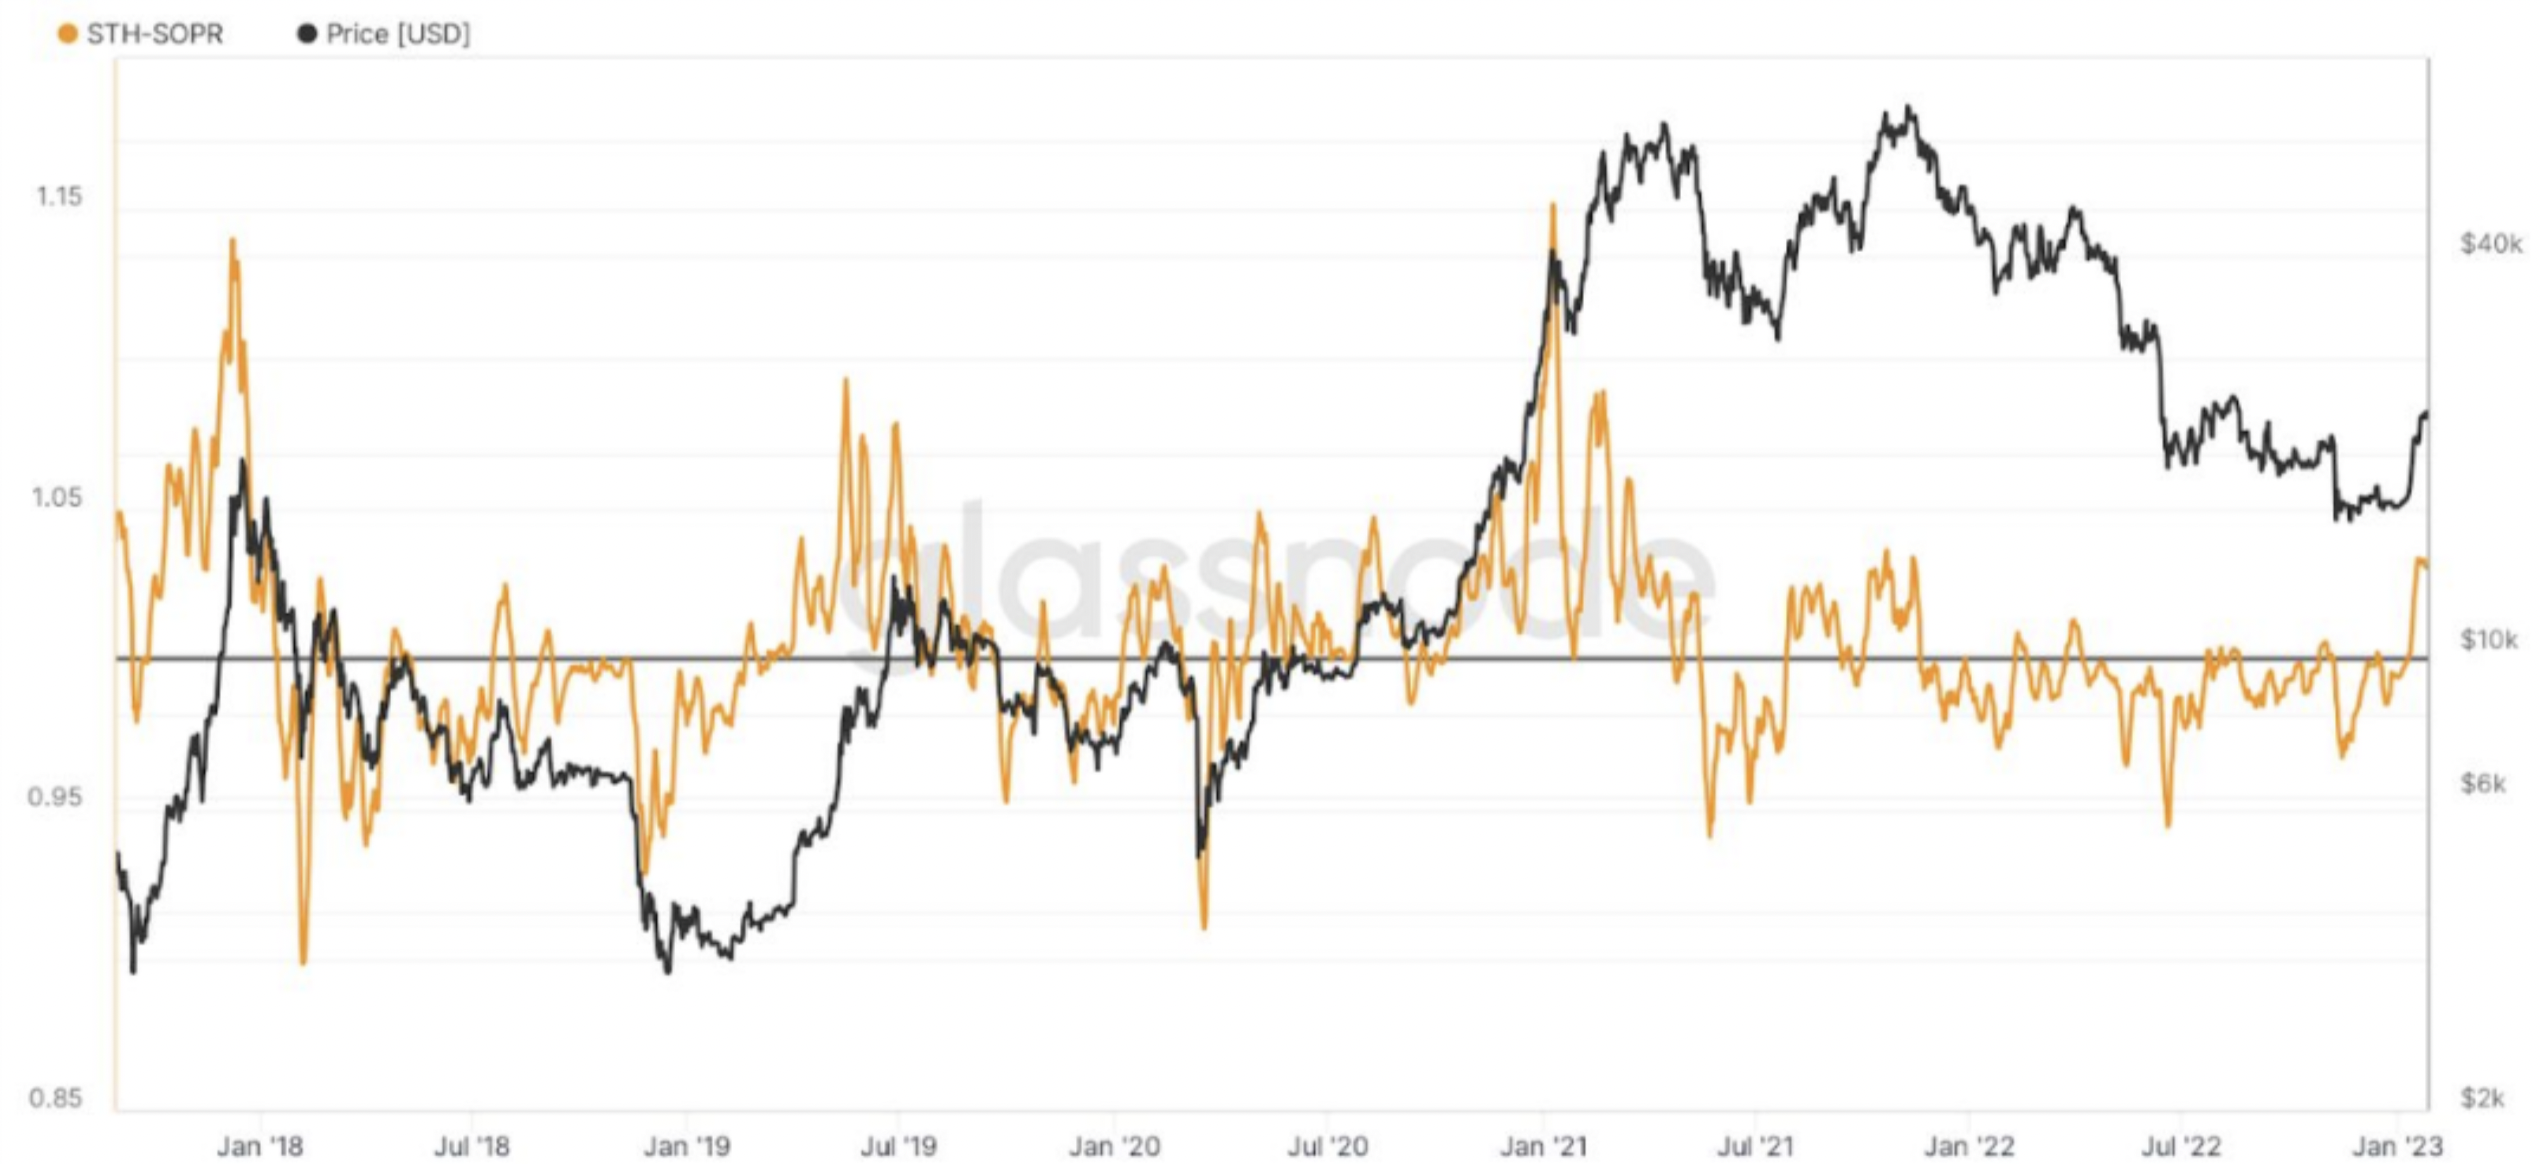 Short-term holders are selling BTC at a profit while long-term holders hold BTC